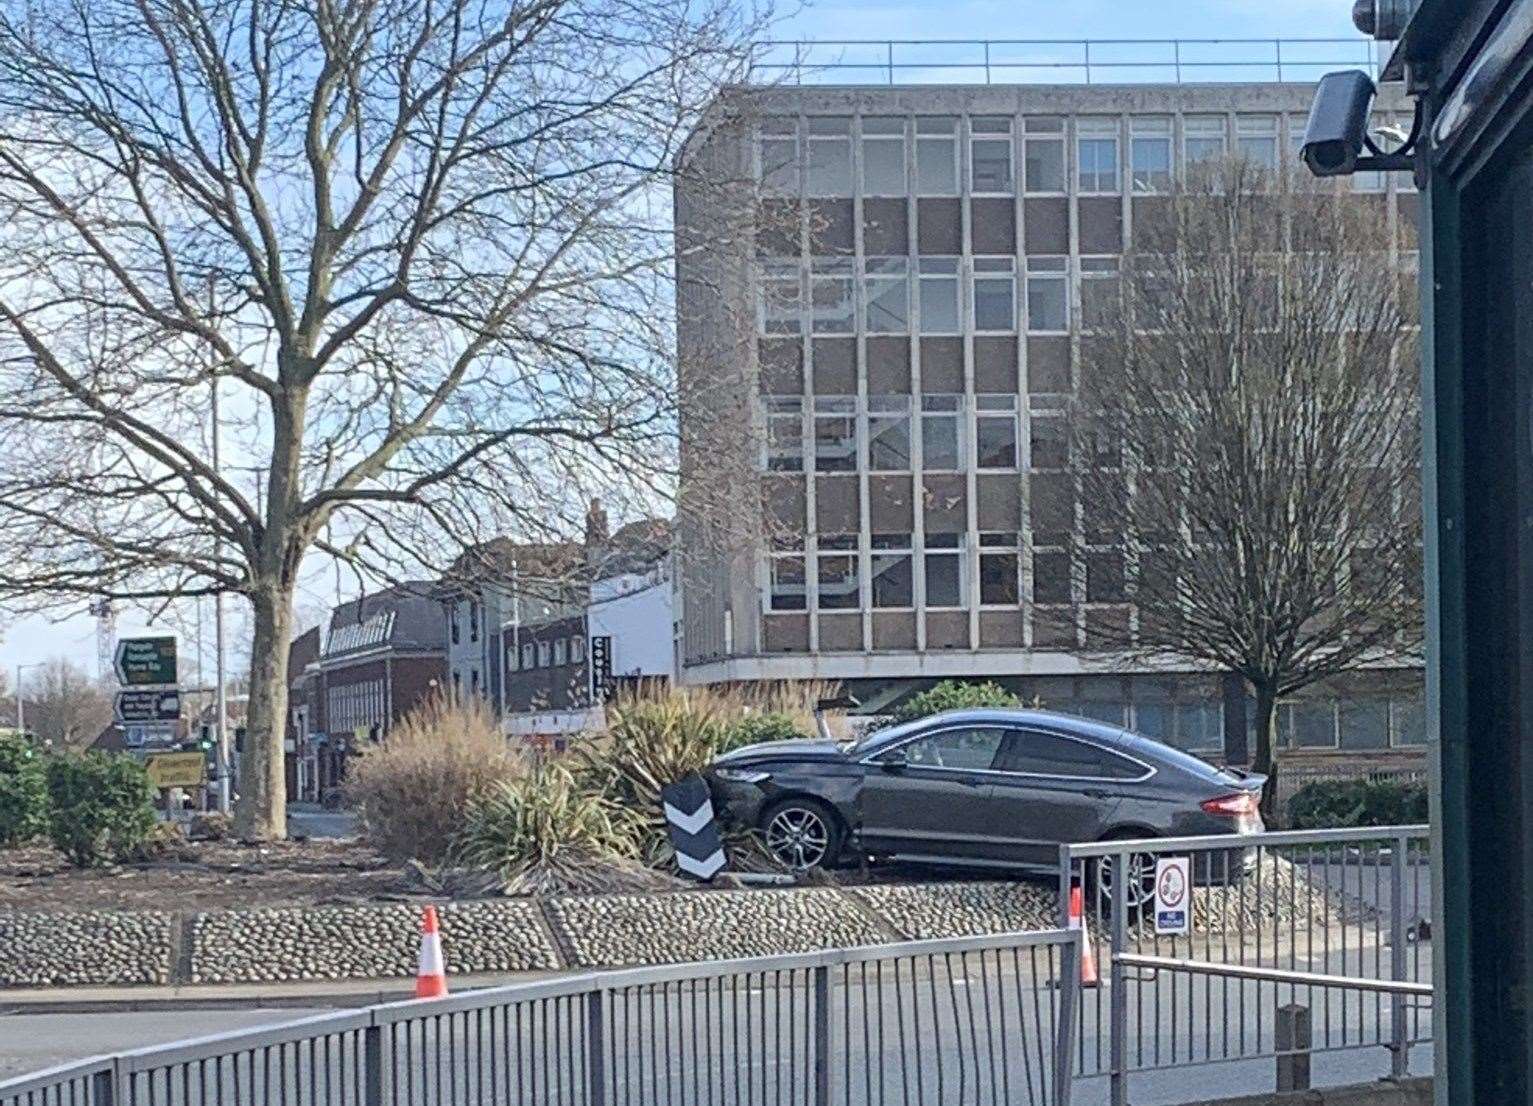 The car on the roundabout in Canterbury this morning. Pictures: Lee Arnold / Twitter